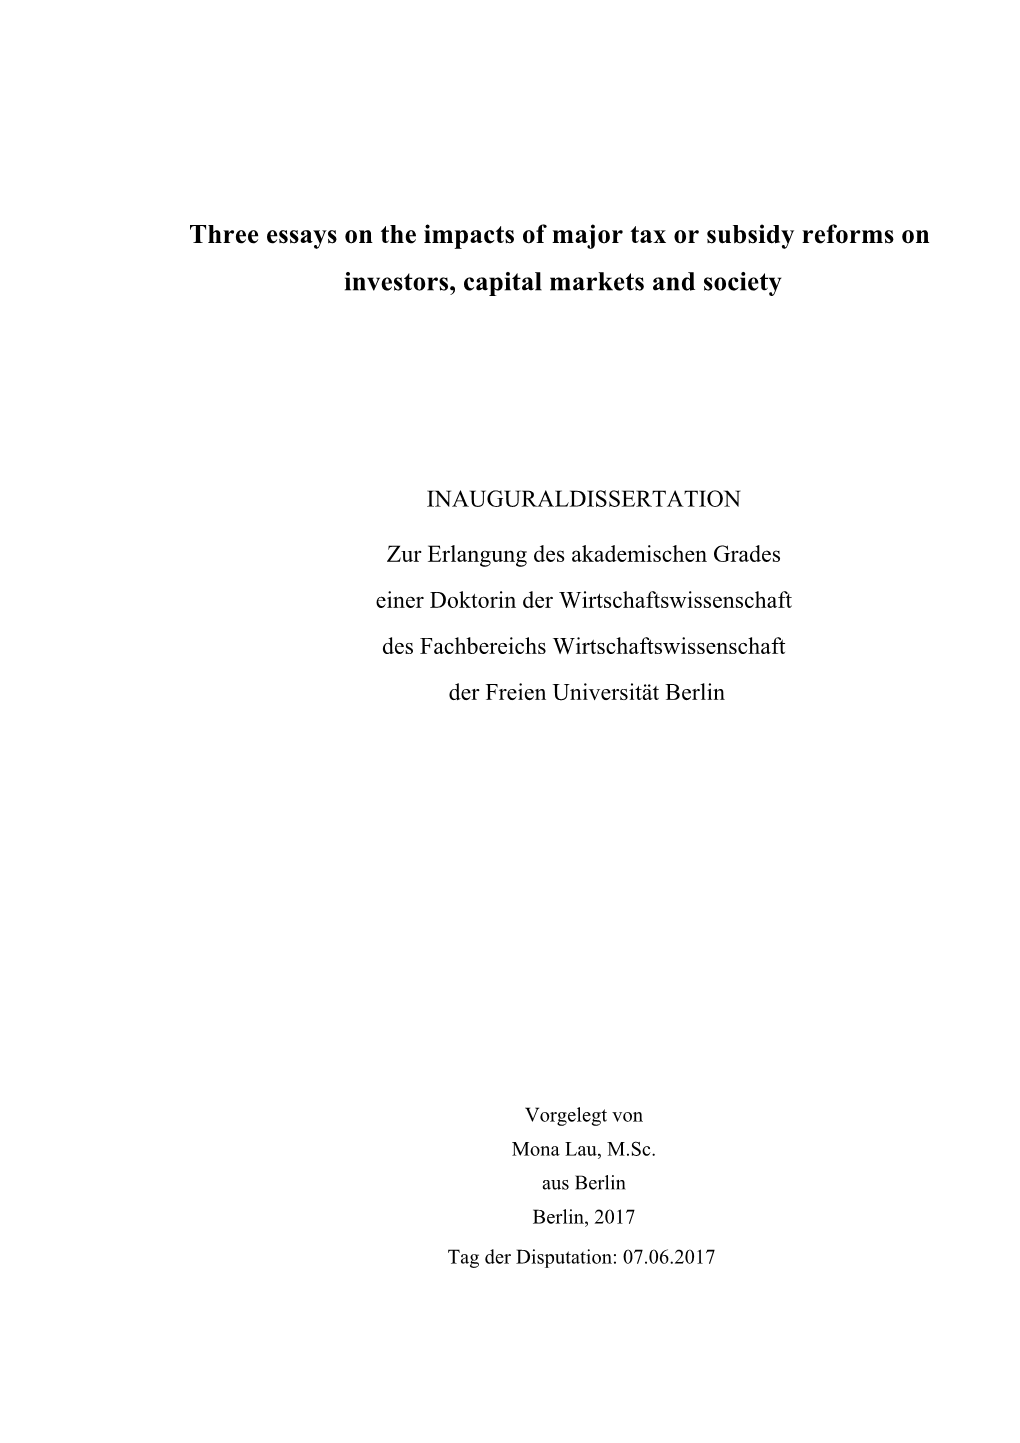 Three Essays on the Impacts of Major Tax Or Subsidy Reforms on Investors, Capital Markets and Society